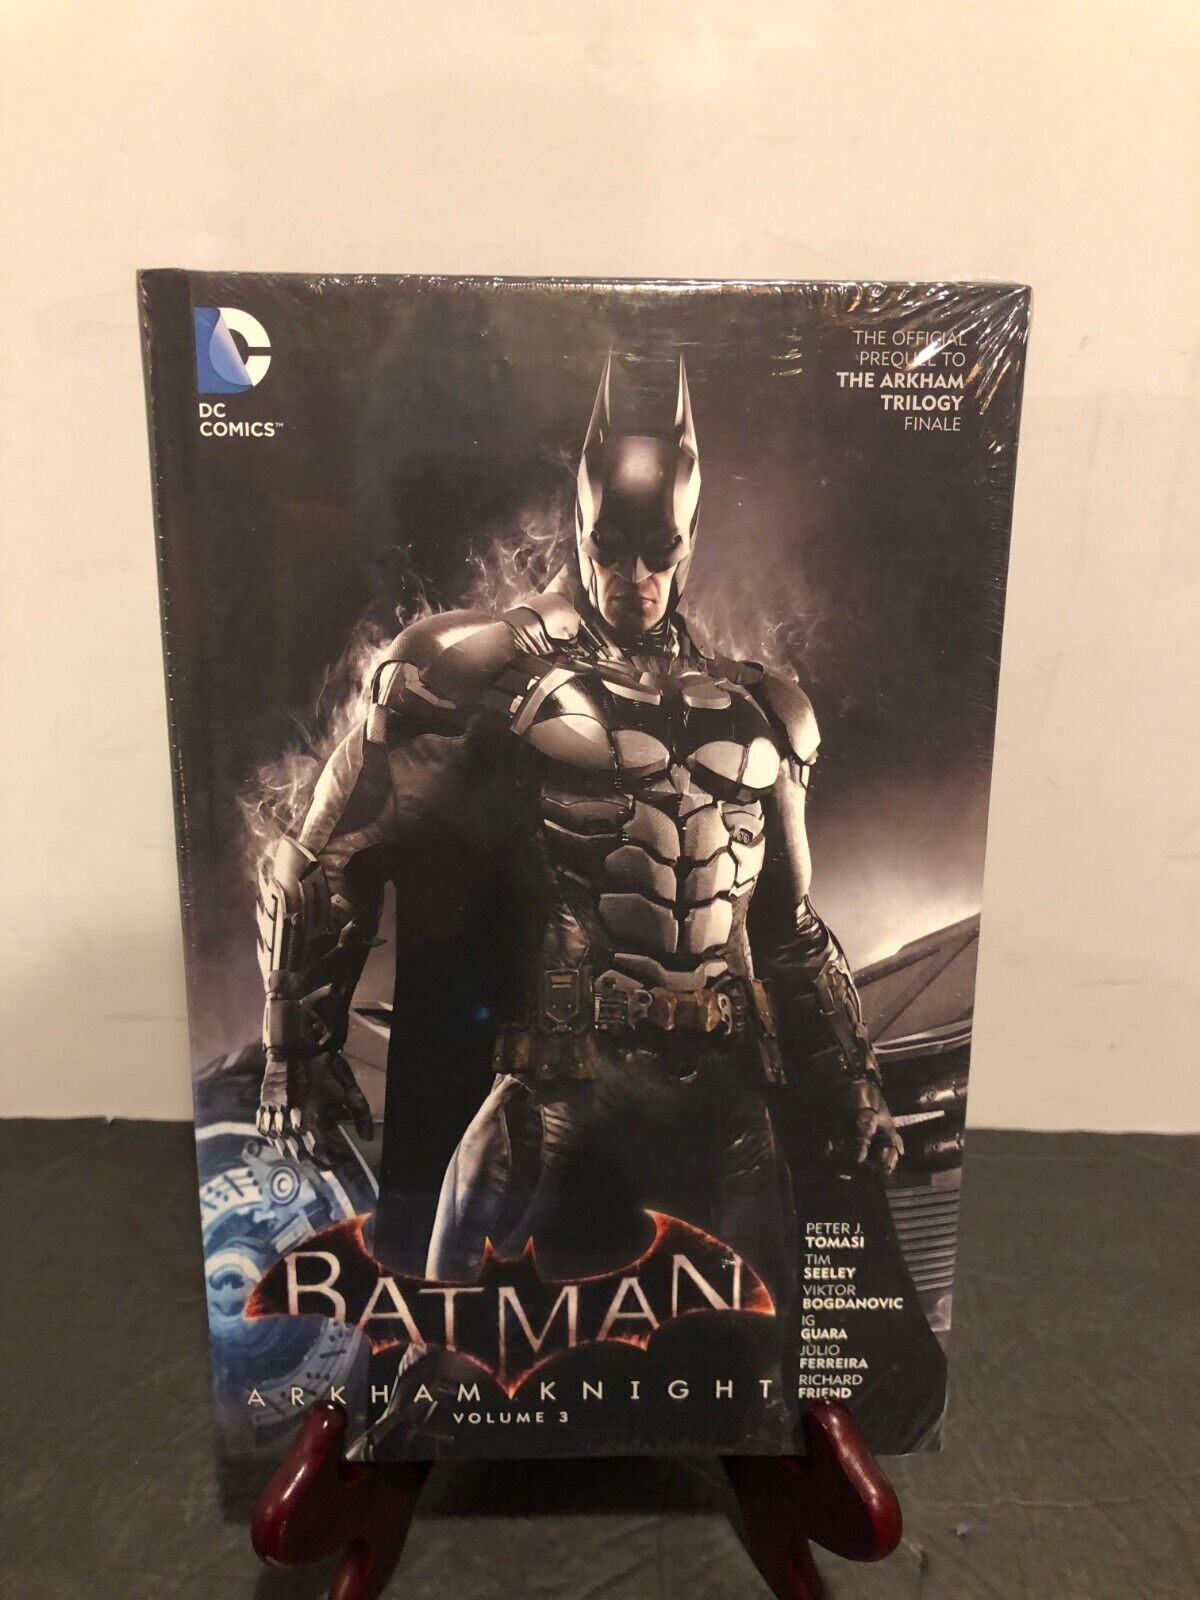 Batman Arkham Knight Vol 3 Official Prequel to the Trilogy Finale Hardcover New